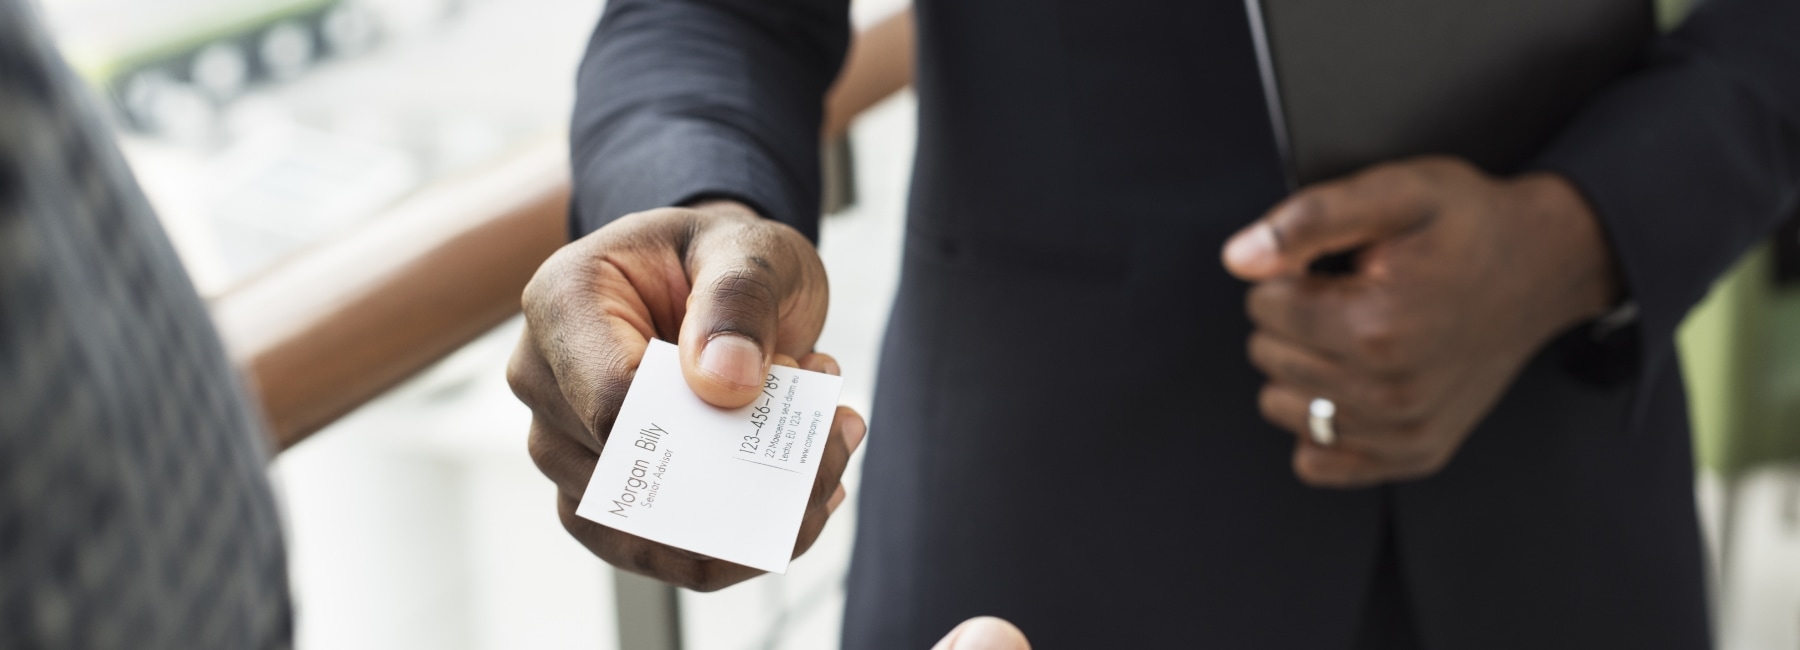 Man offering his business card